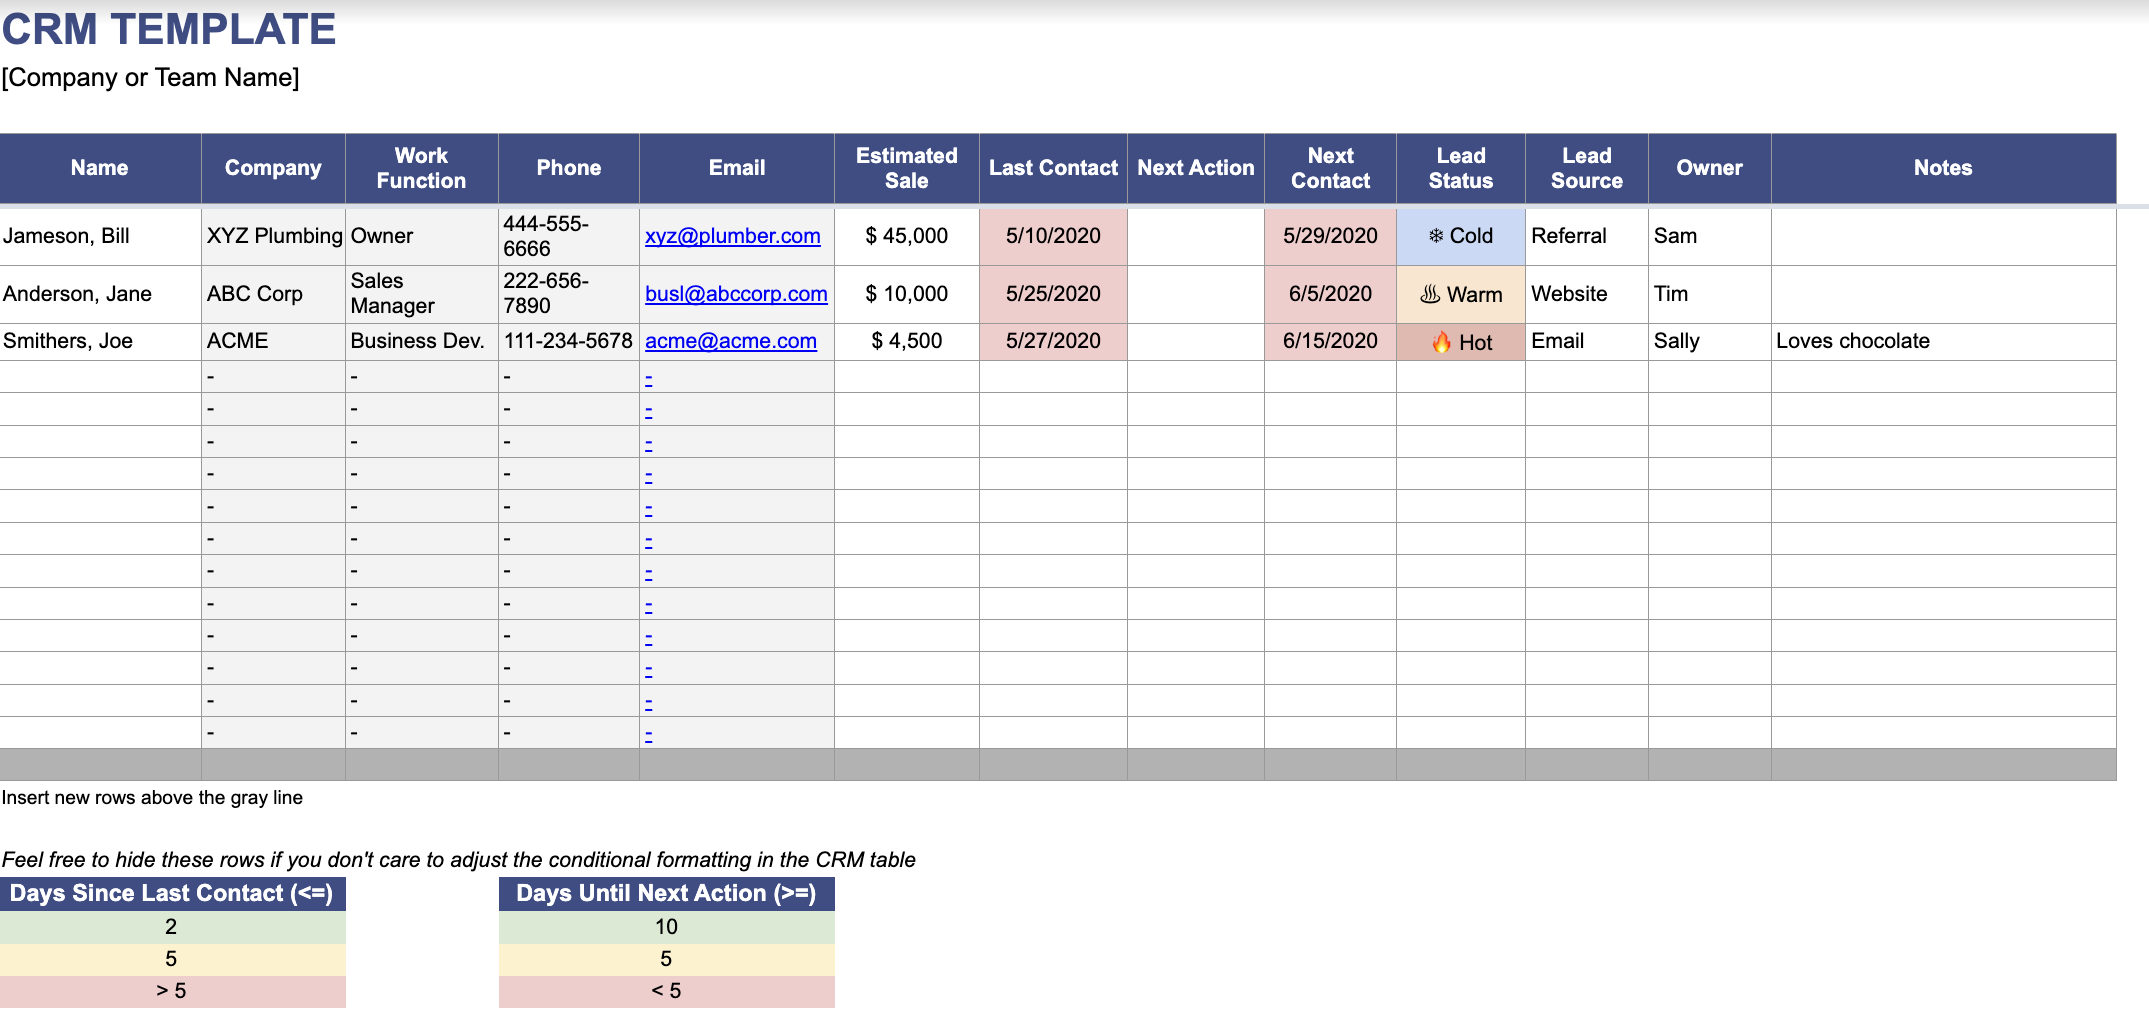 Image of CRM template from Vertex42